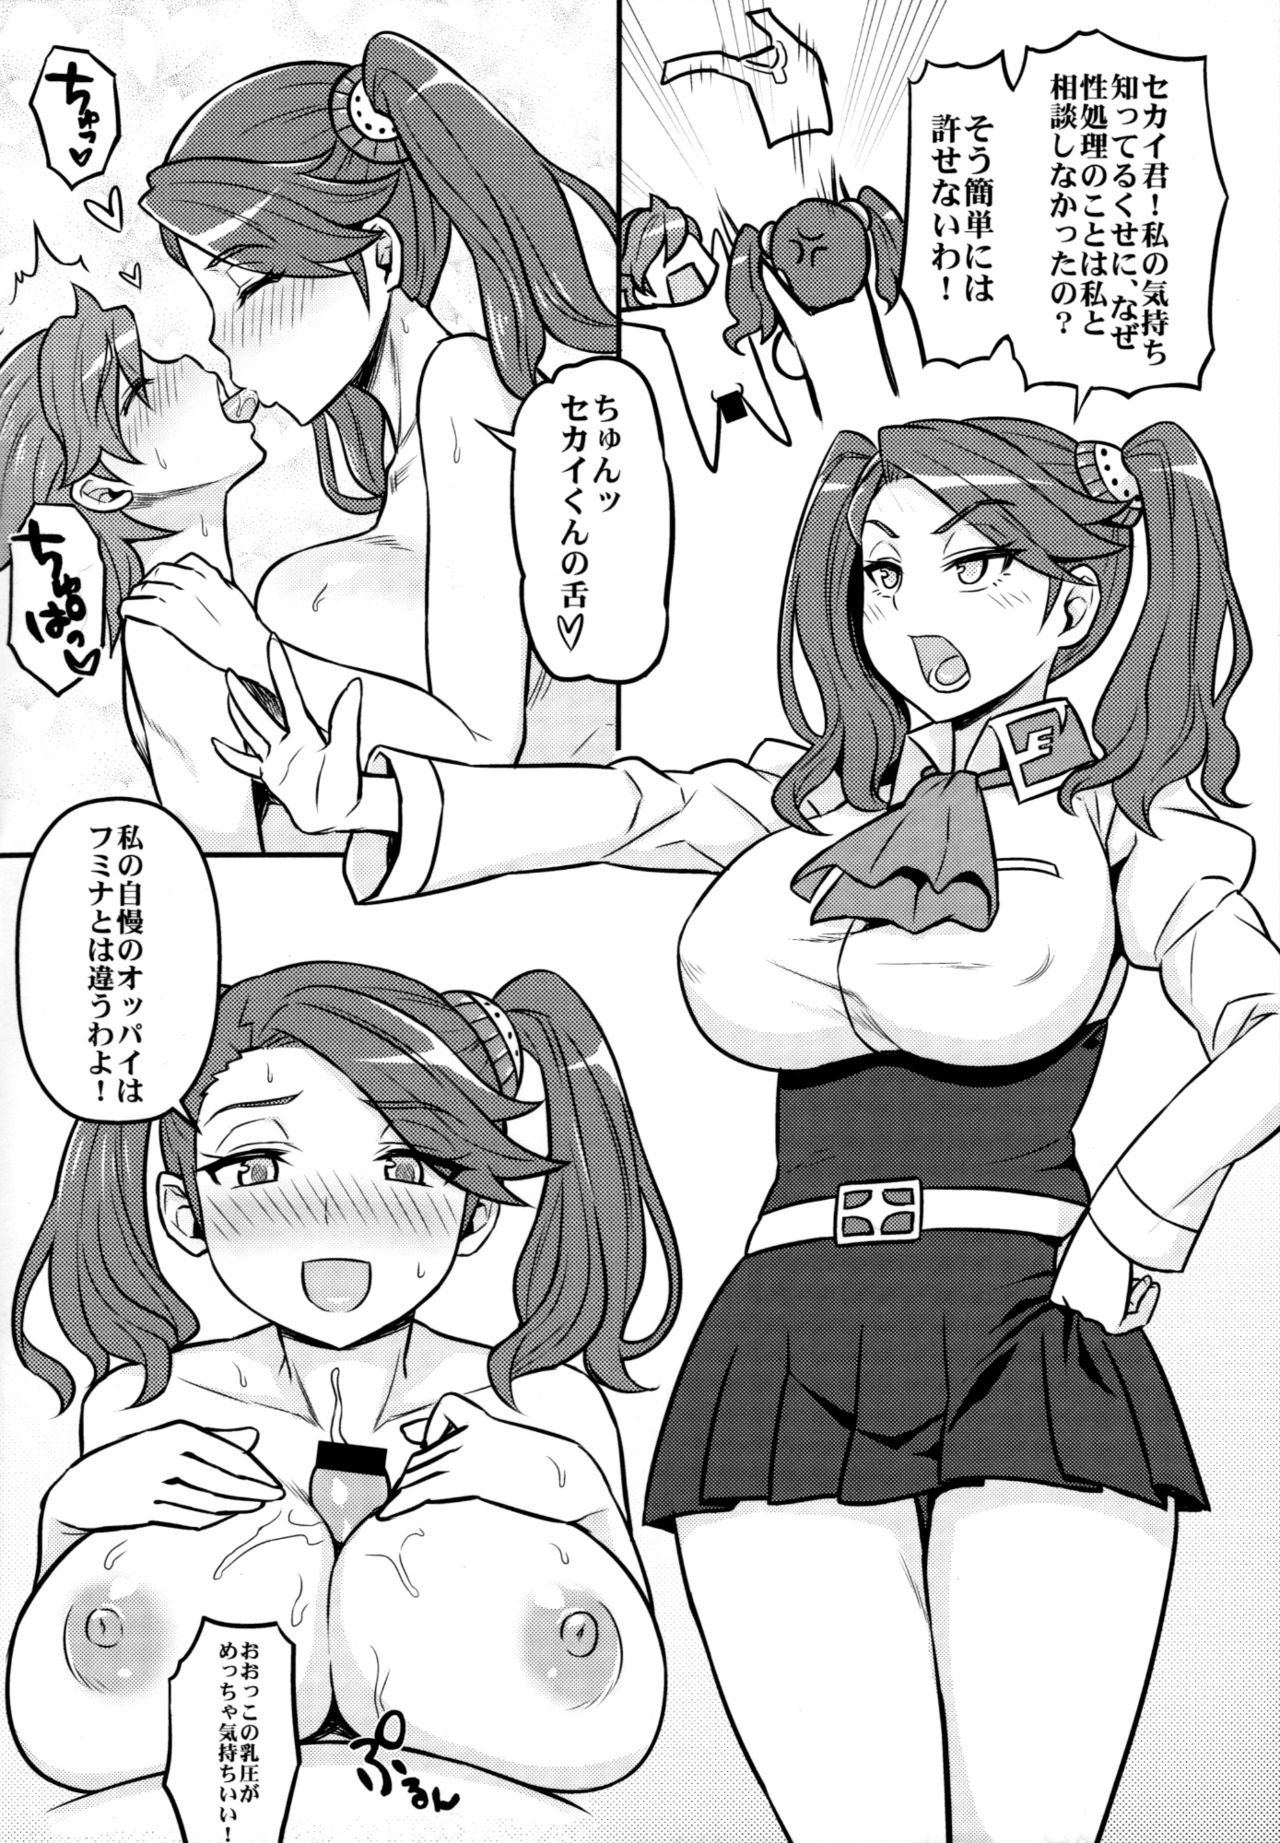 (C87) [Green Ketchup (Zhen Lu)] Nayamashii Fighters (Gundam Build Fighters Try) page 19 full